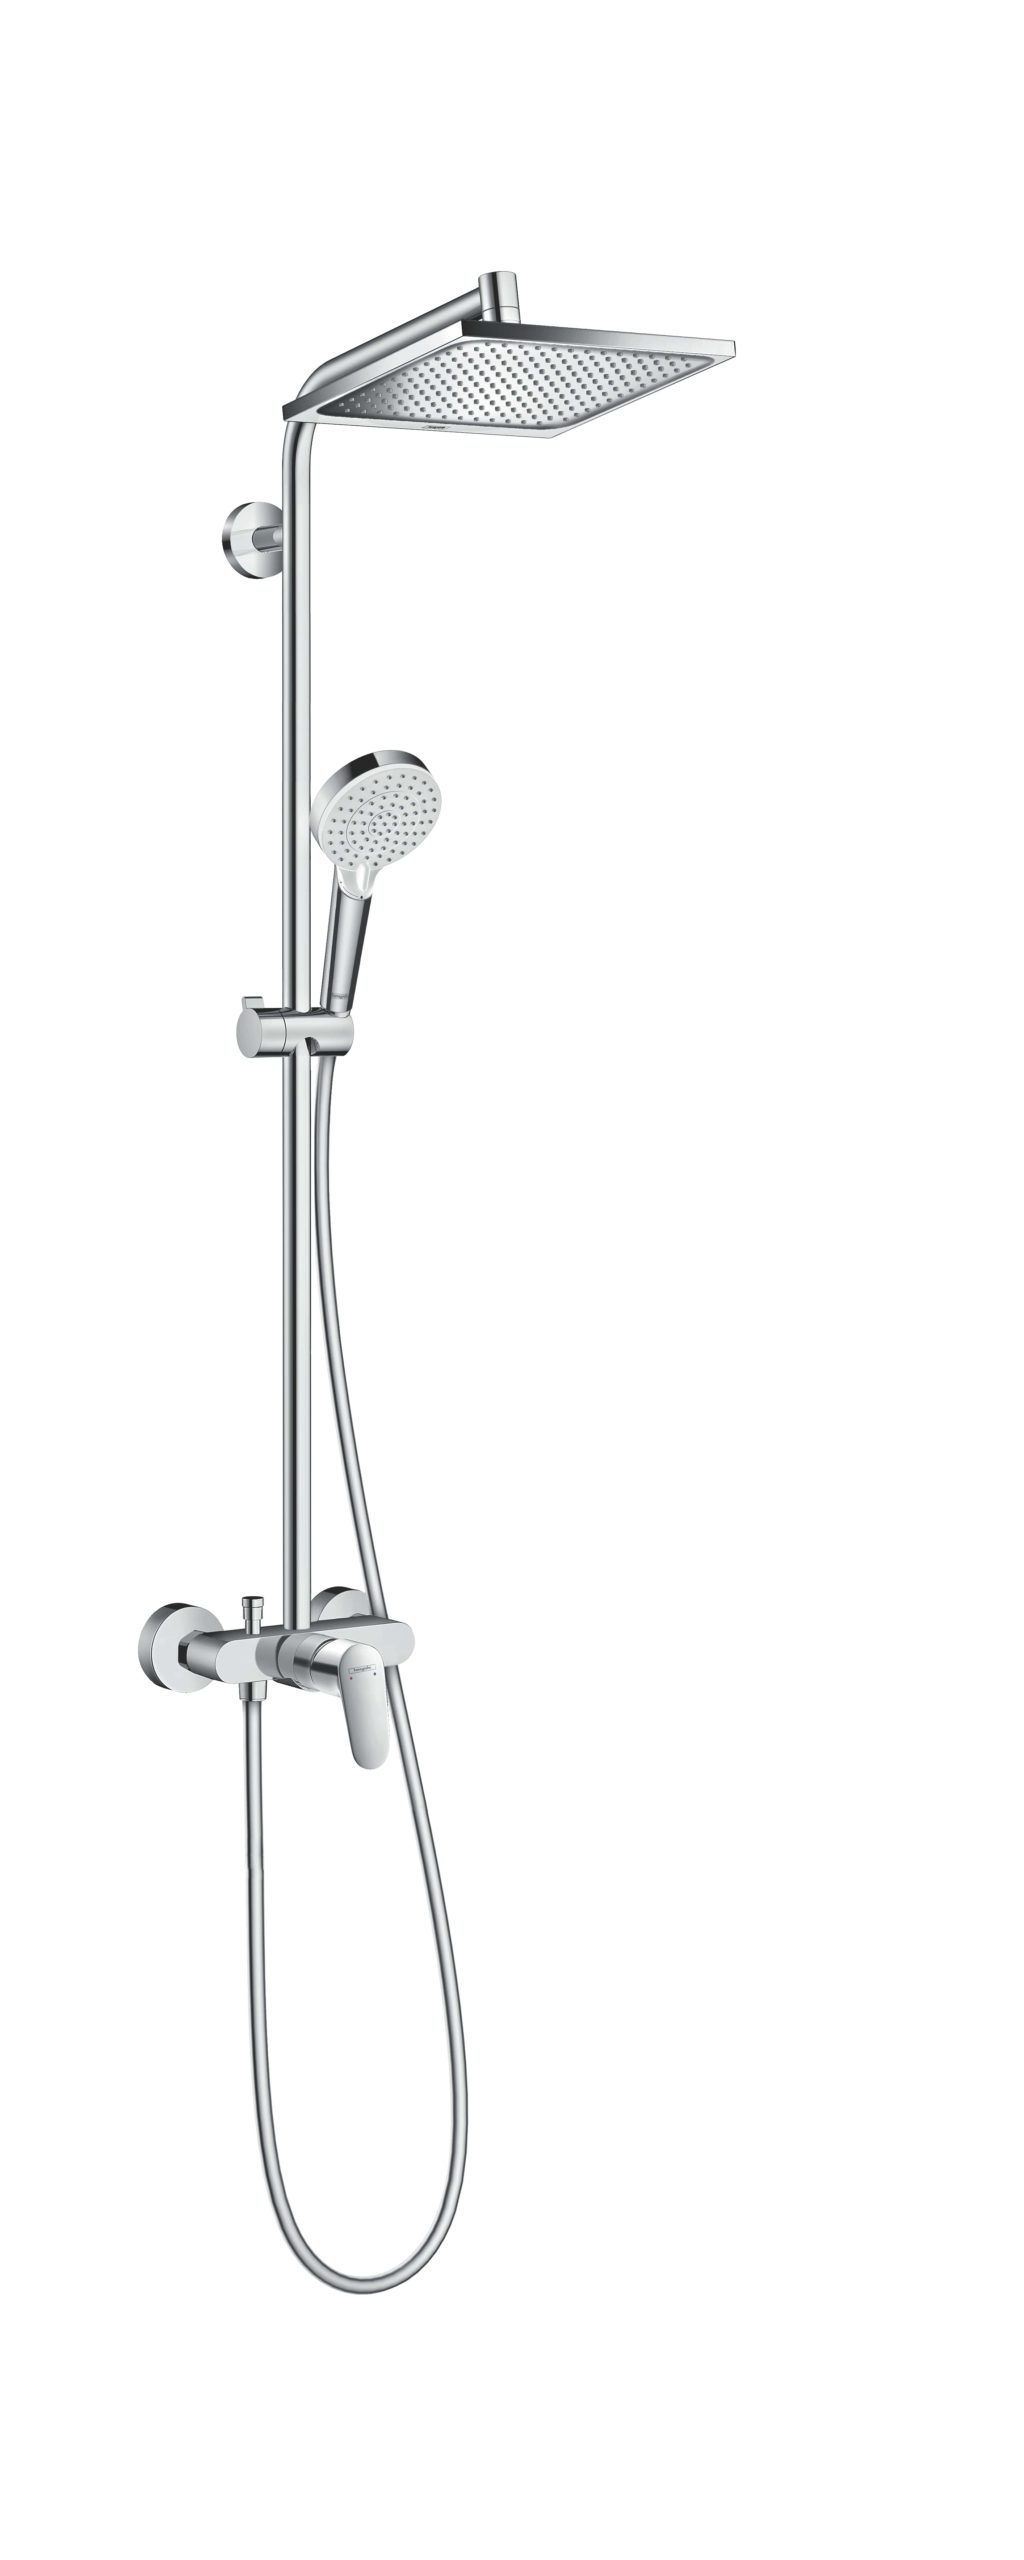 Hansgrohe shower square